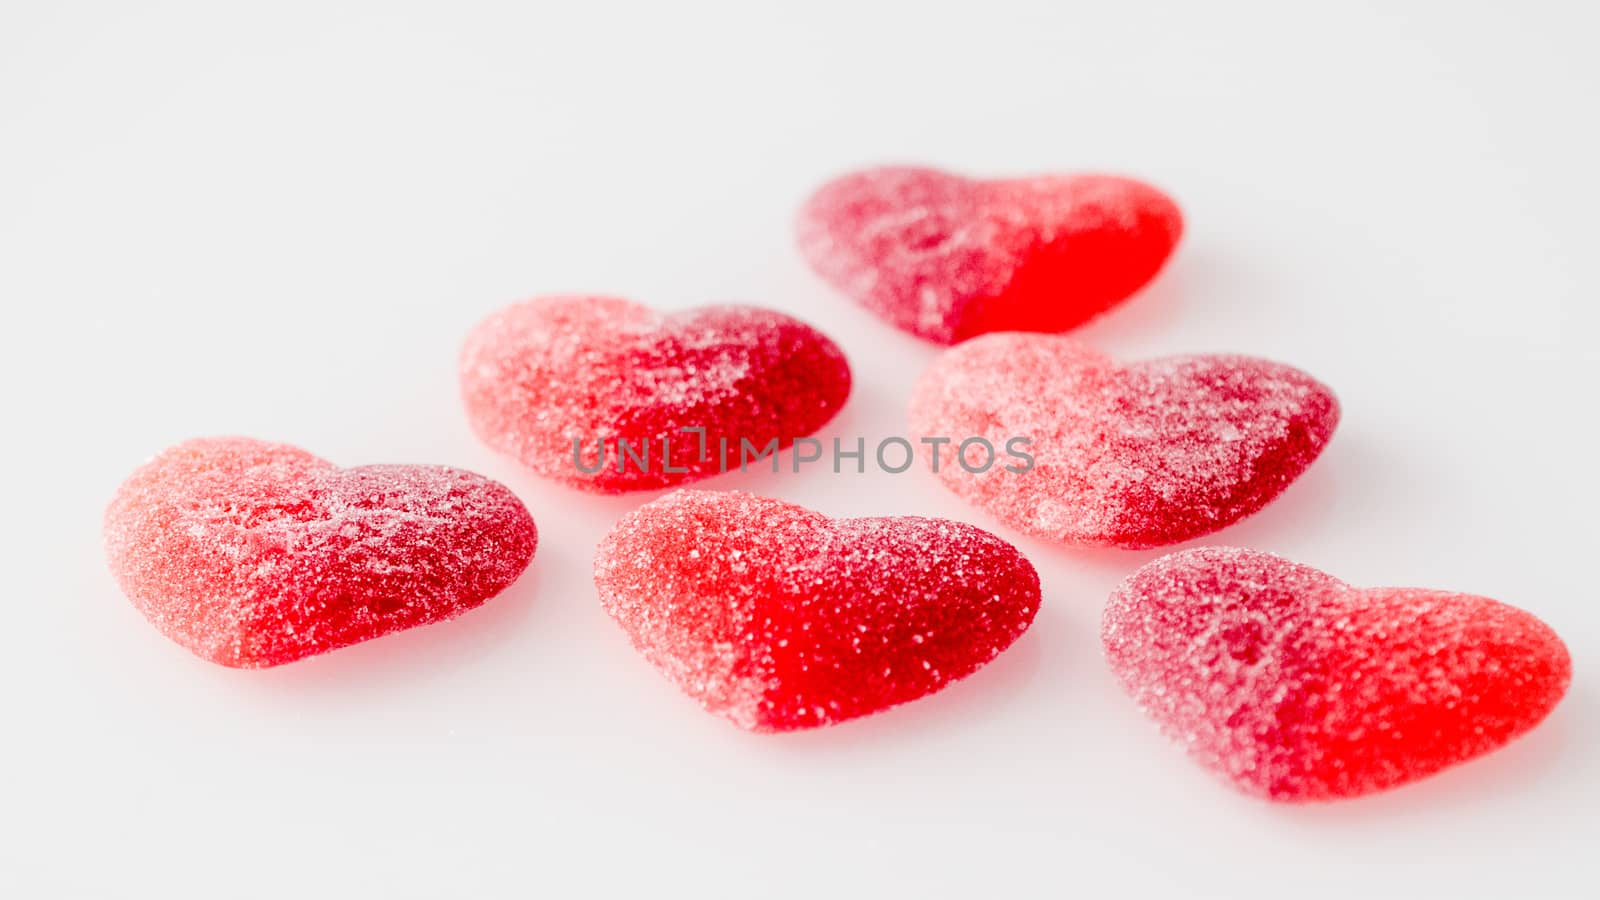 candy from marmalade in the form of red hearts by alexandr_sorokin